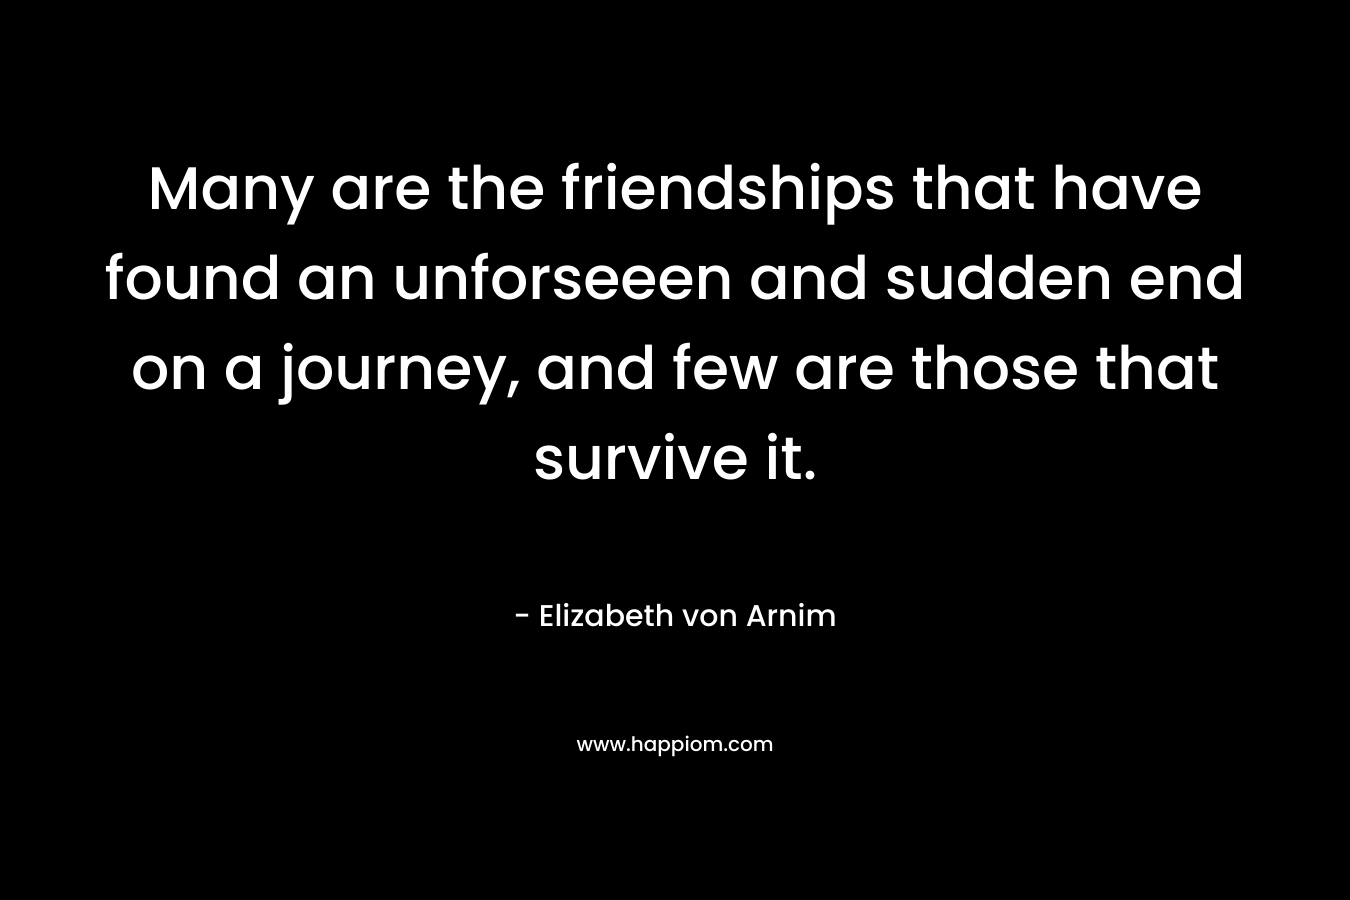 Many are the friendships that have found an unforseeen and sudden end on a journey, and few are those that survive it.